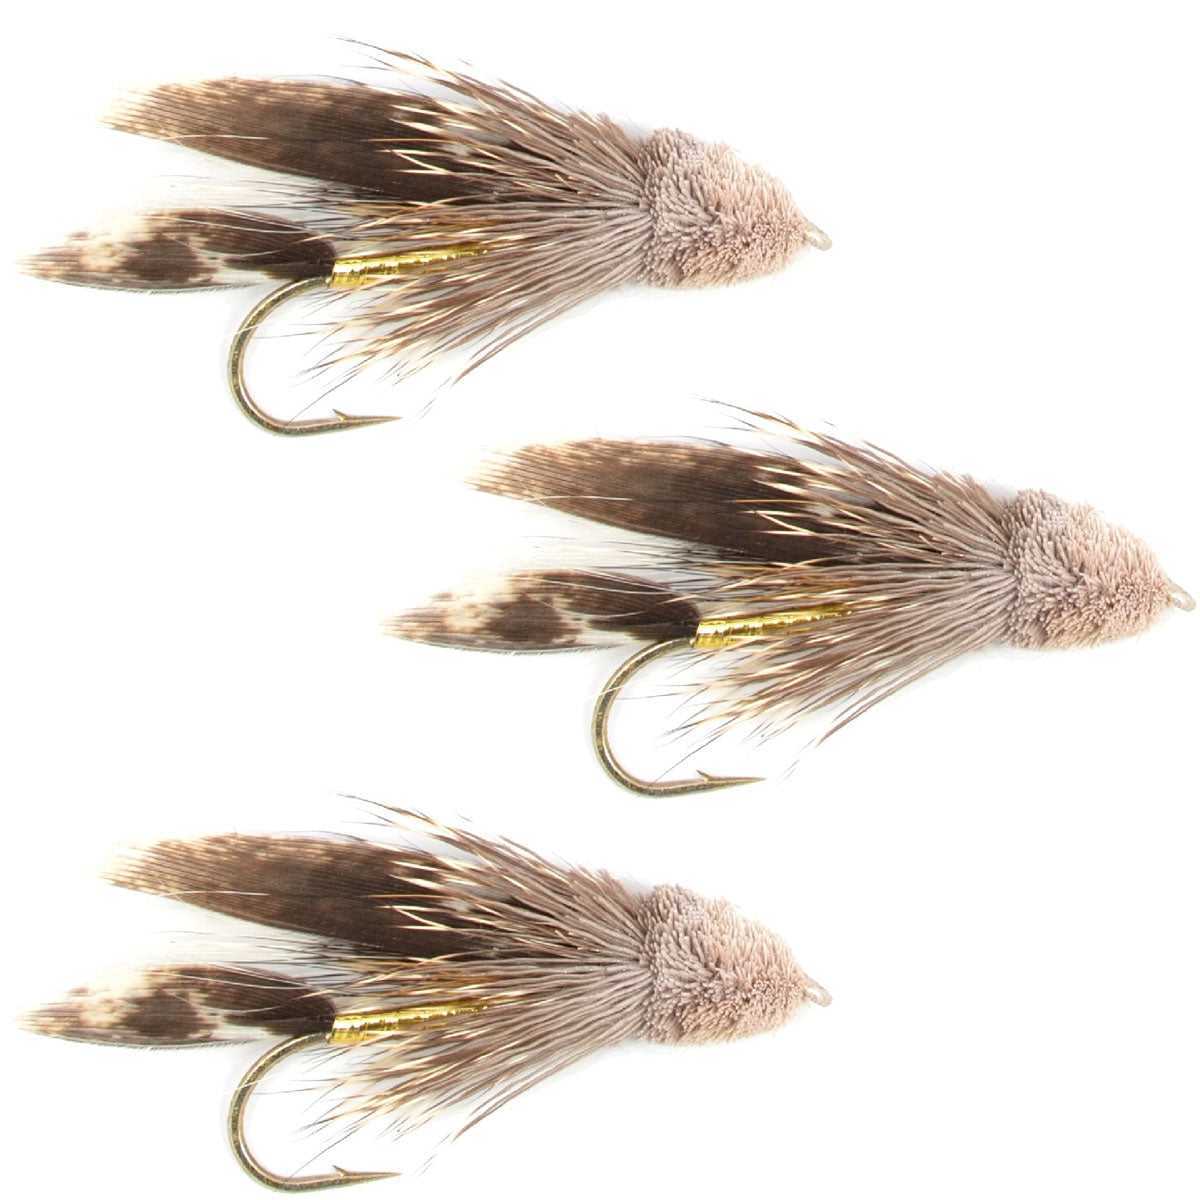 3 Pack Muddler Minnow Trout and Bass Streamer Fly - Hook Size 10